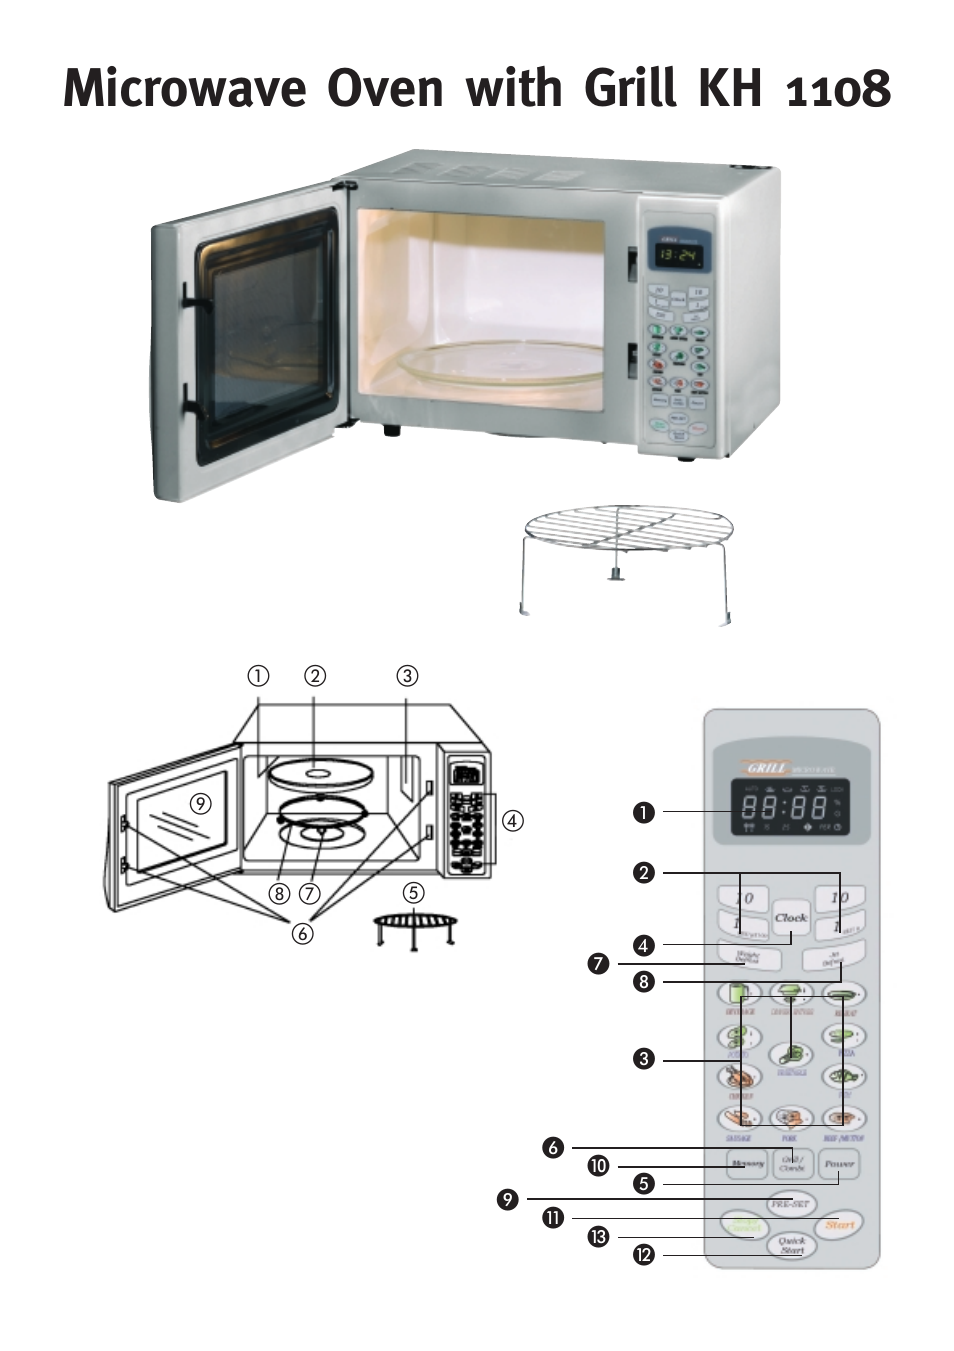 Microwave oven with grill kh 1108 | Bifinett KH 1108 User Manual | Page 3 /  24